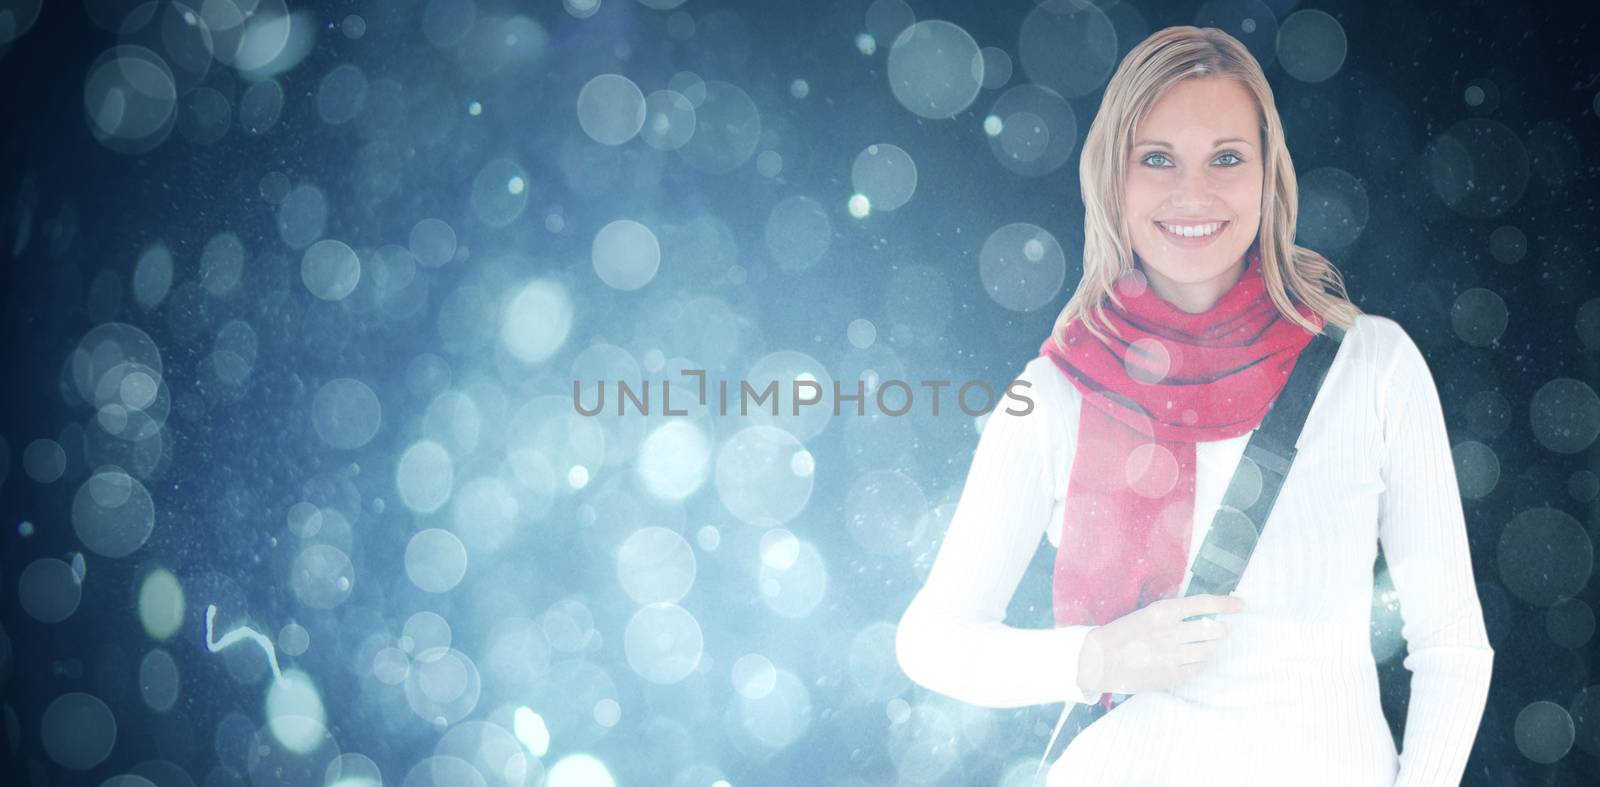 Portrait of a delighted student with scarf smiling at the camera against blue abstract light spot design